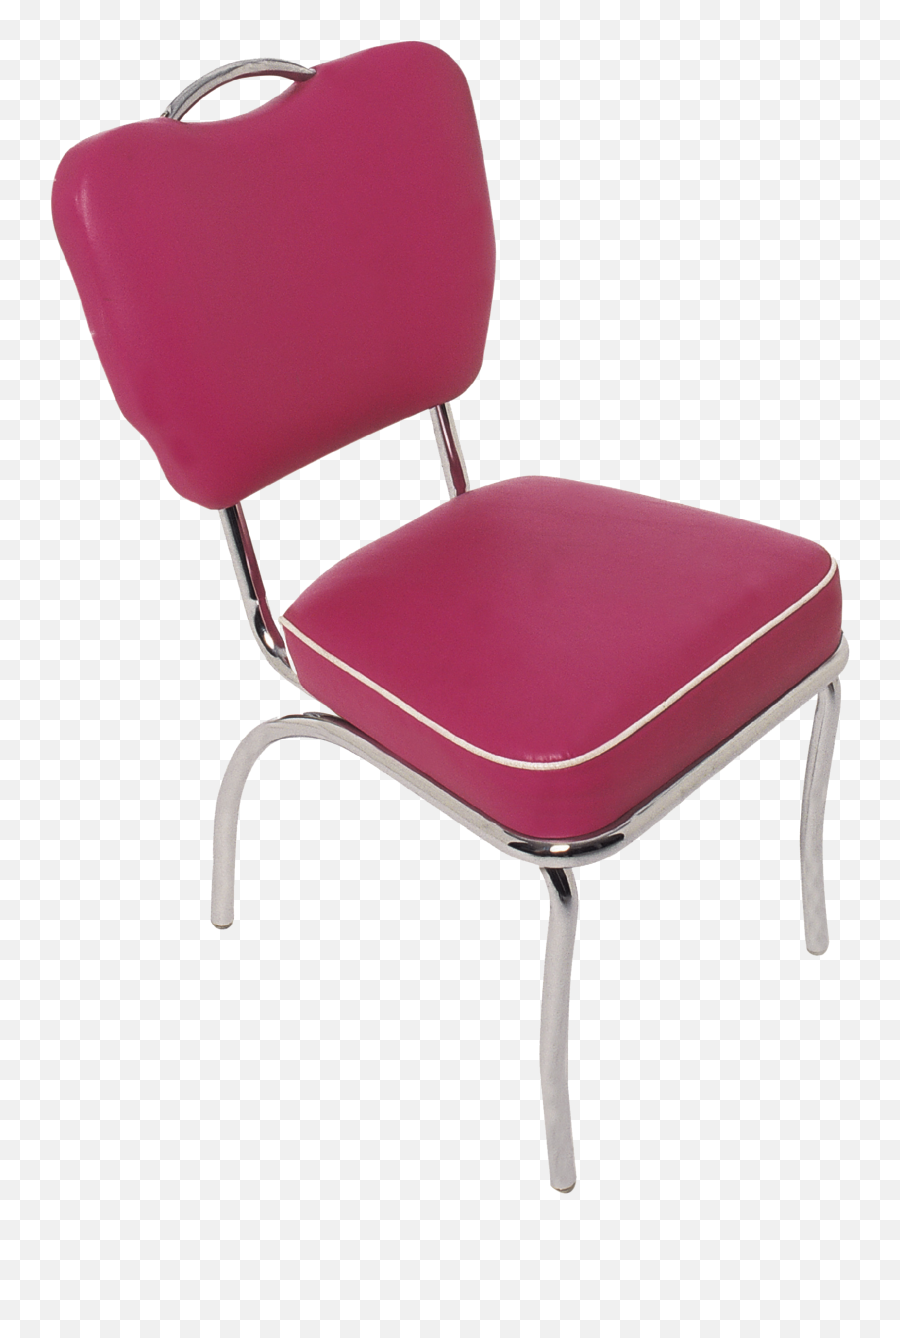 Chair Clipart Png - Pink Chair Transparent Background Emoji,Chair Clipart